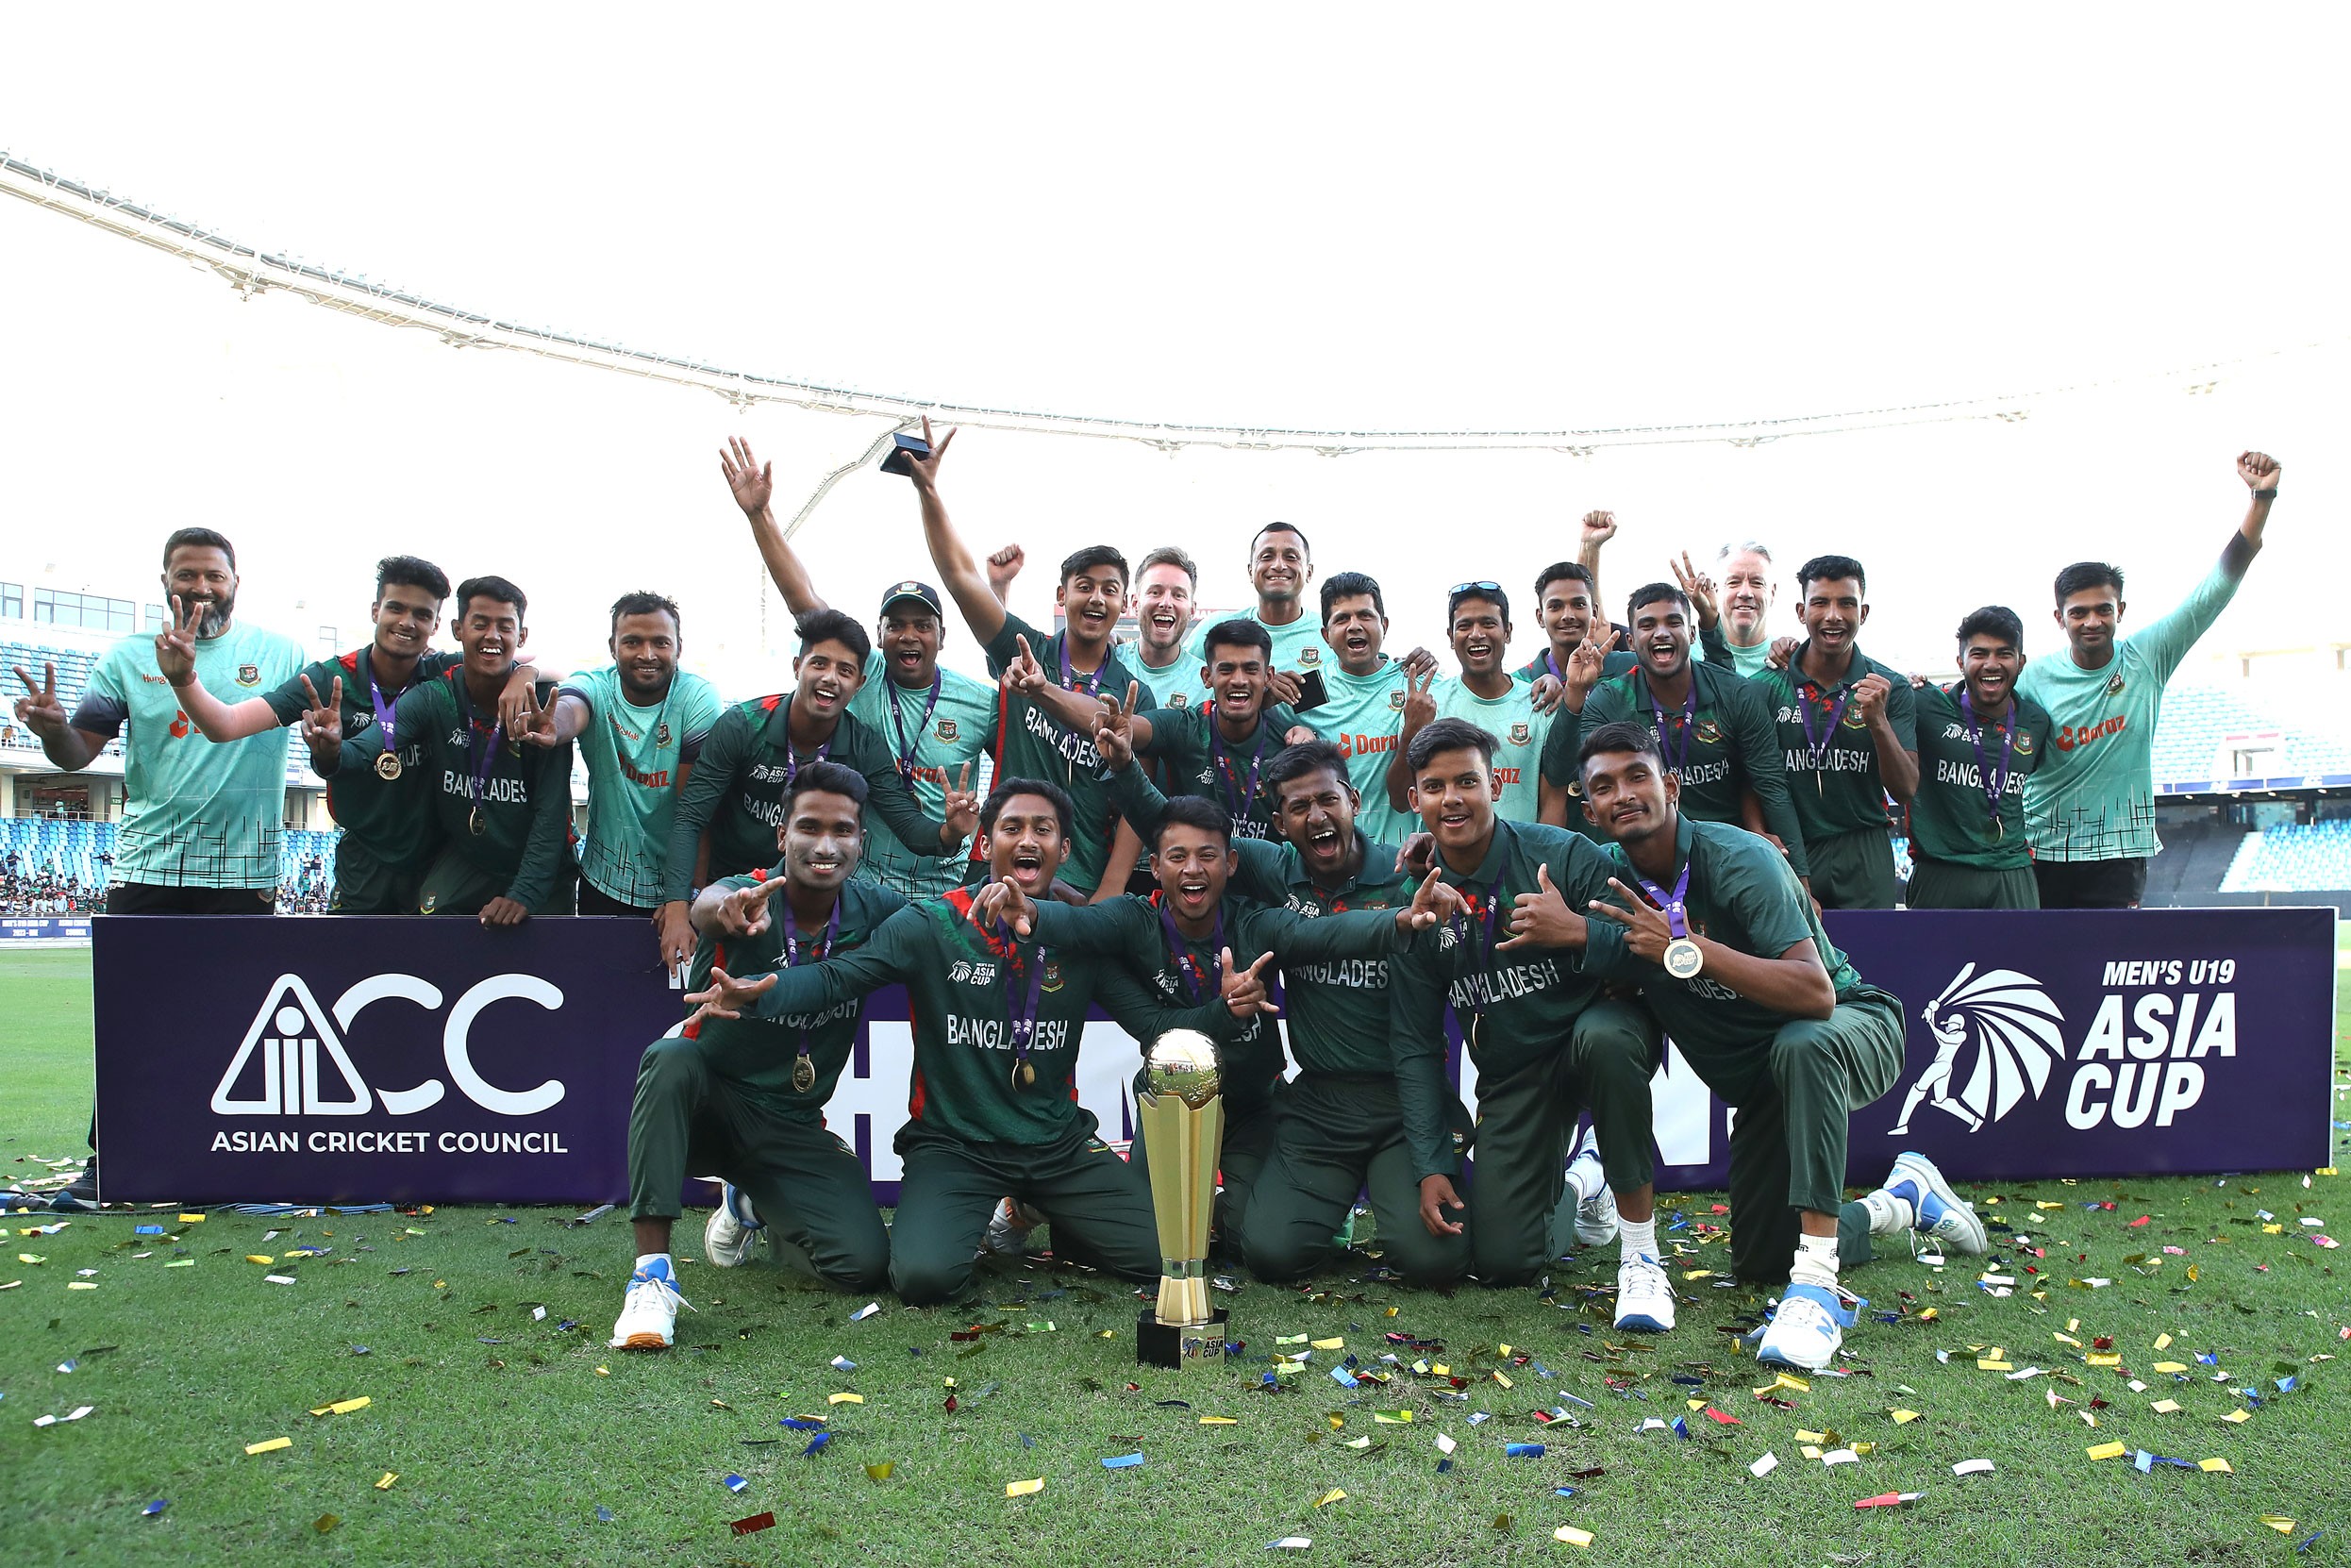 Bangladesh Under-19 clinched maiden ACC Under-19 Asia Cup title